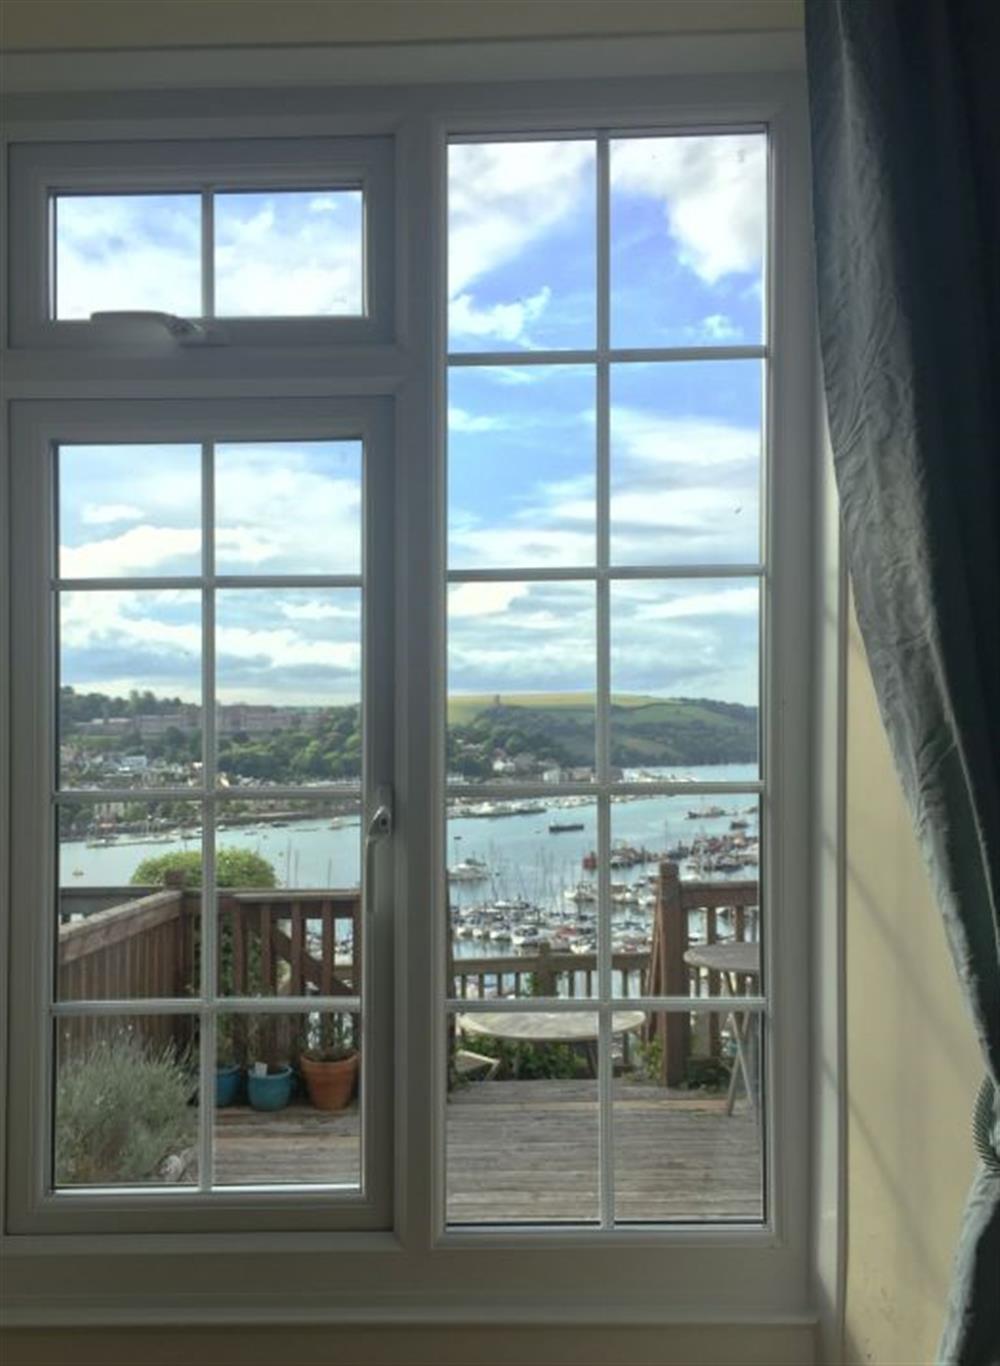 Views from inside at The Boathouse, Kingswear, Torbay and the Red Cliffs